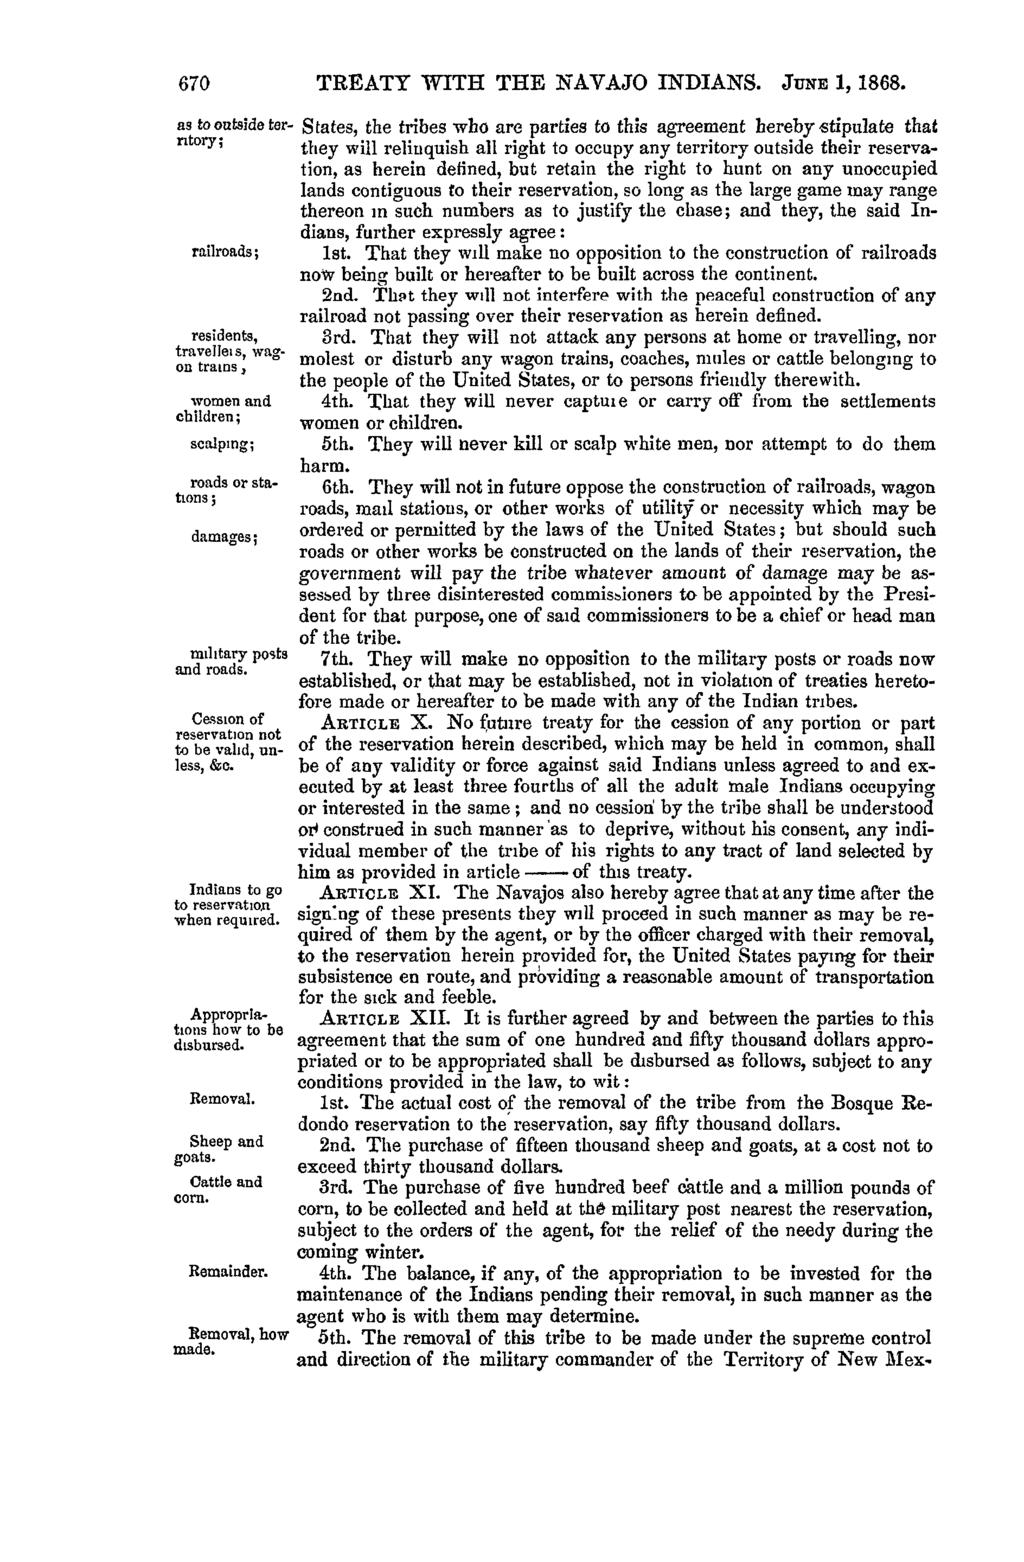 Case: 12-16958 05/15/2013 ID: 8630738 DktEntry: 9-3 Page: 74 of 99 TREATY WITH THE NAVAJO INDIANS. JUNE 1, 1868.